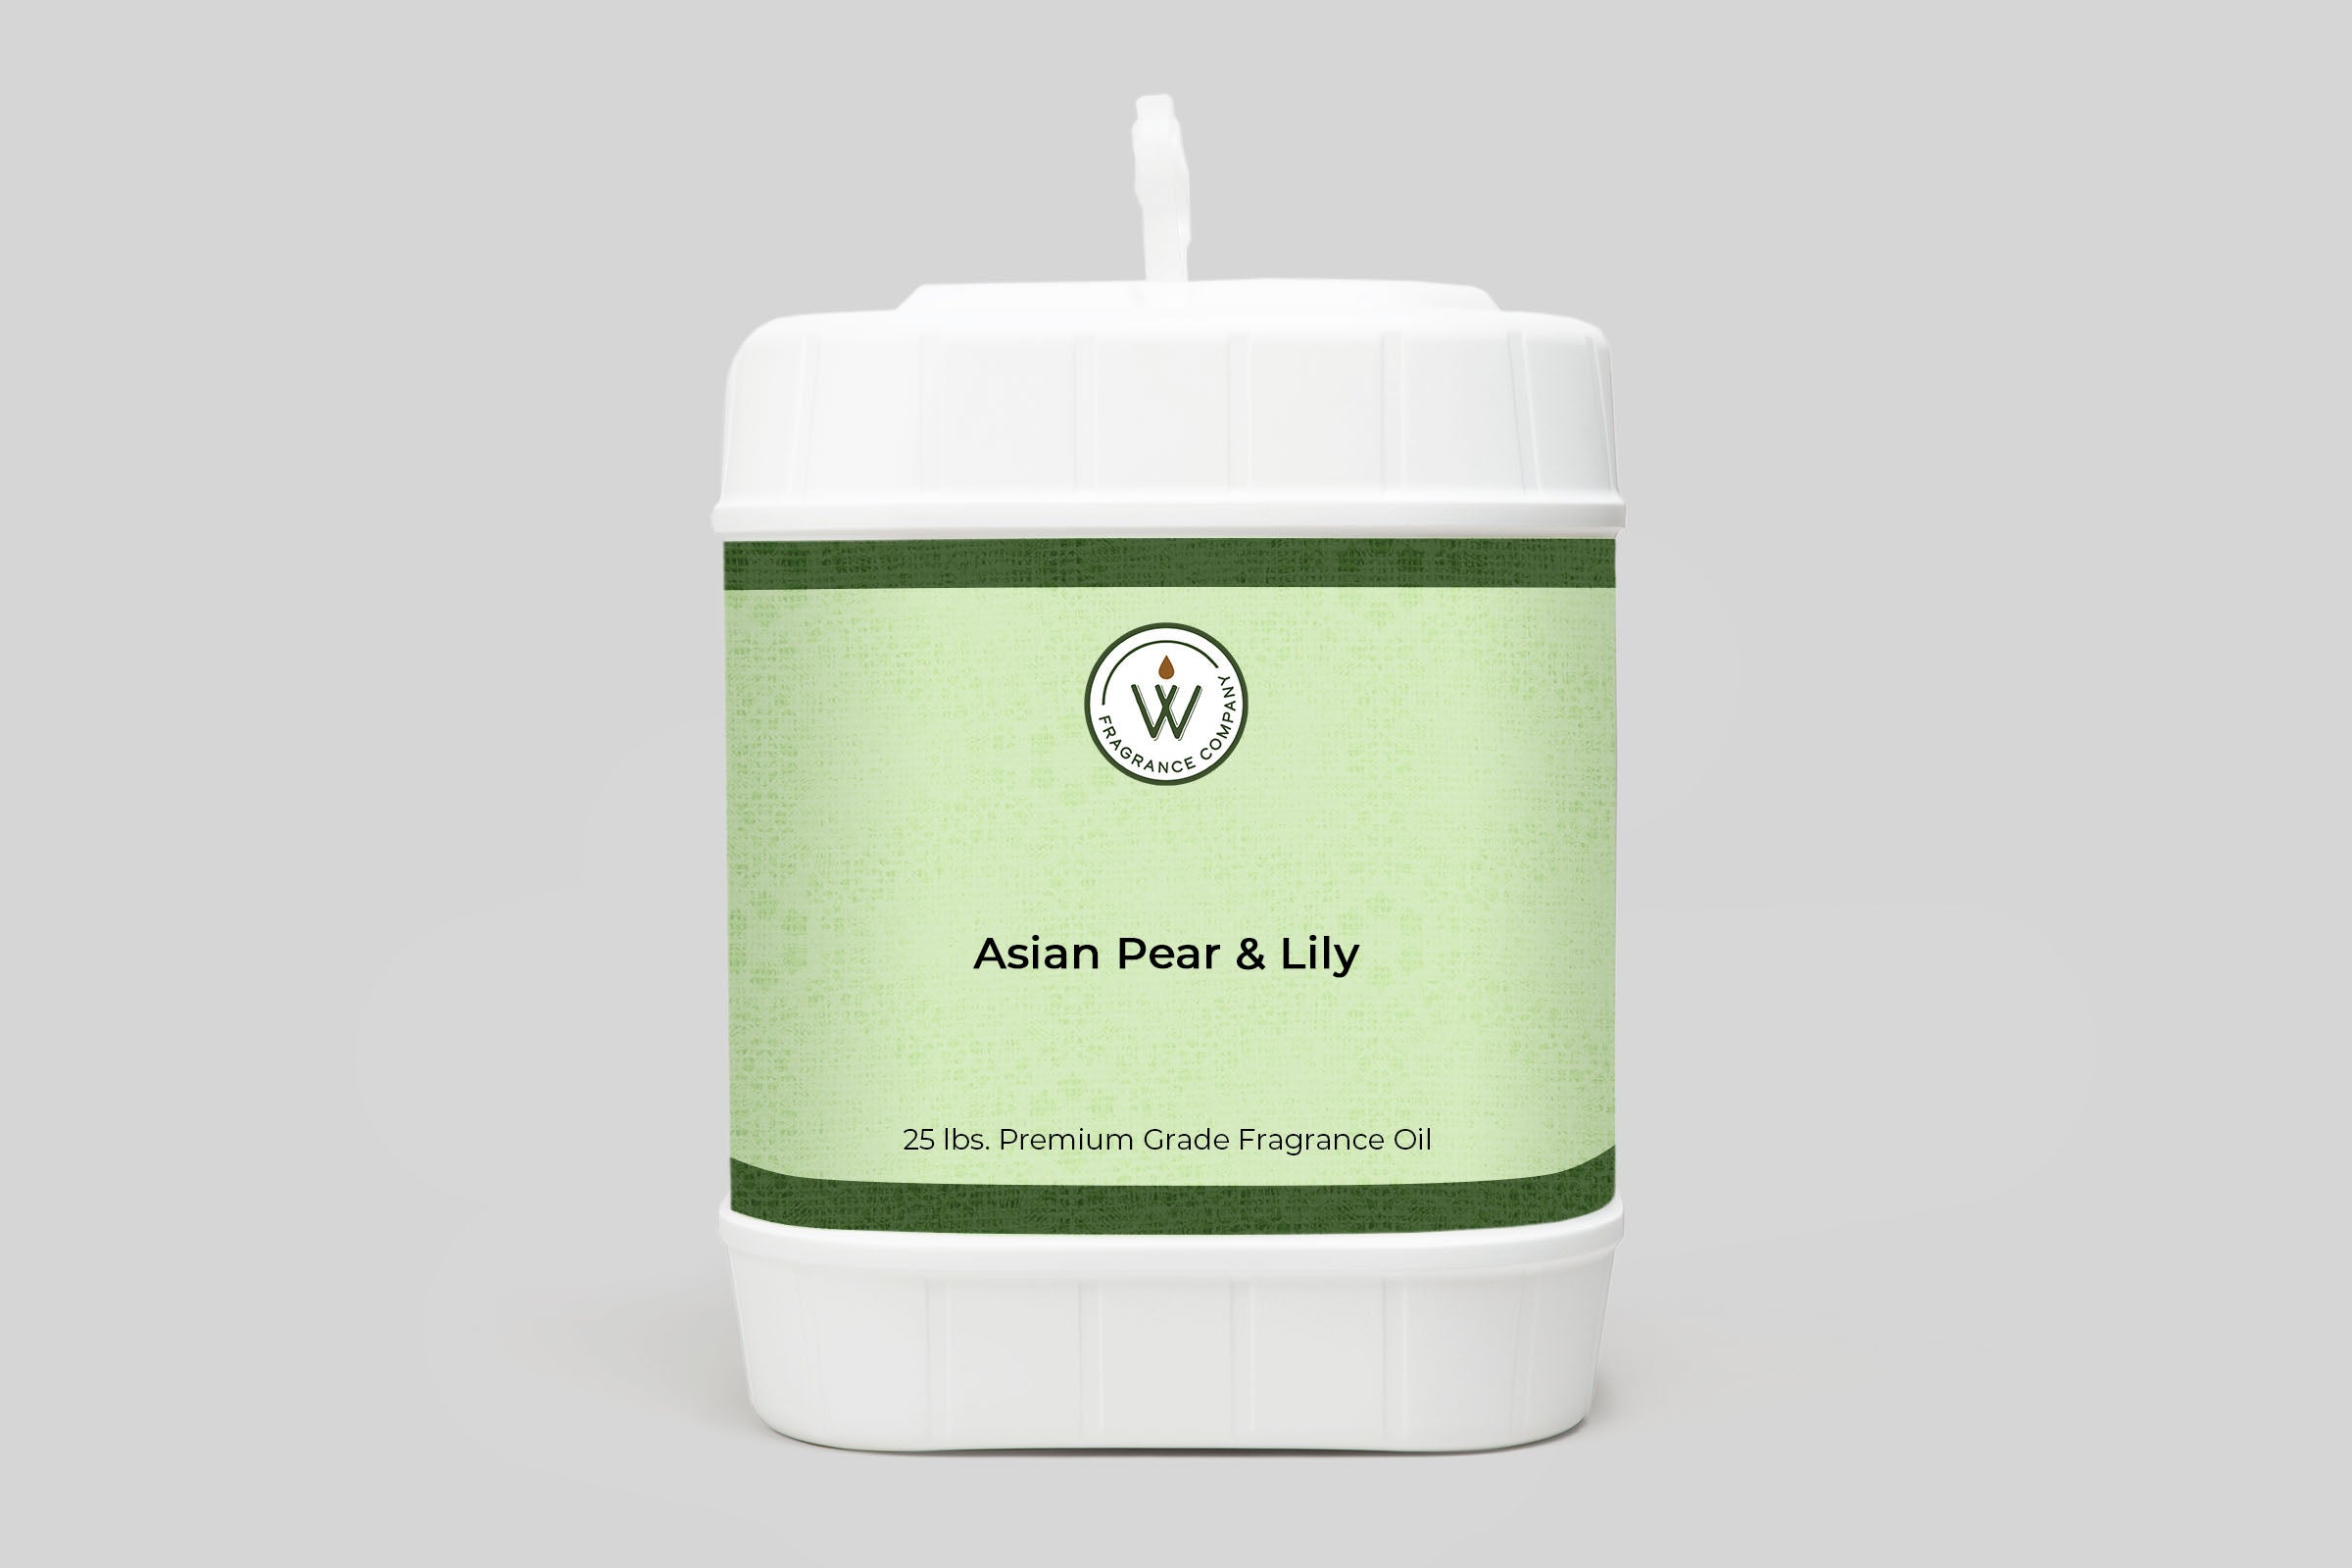 Asian Pear & Lily Fragrance Oil